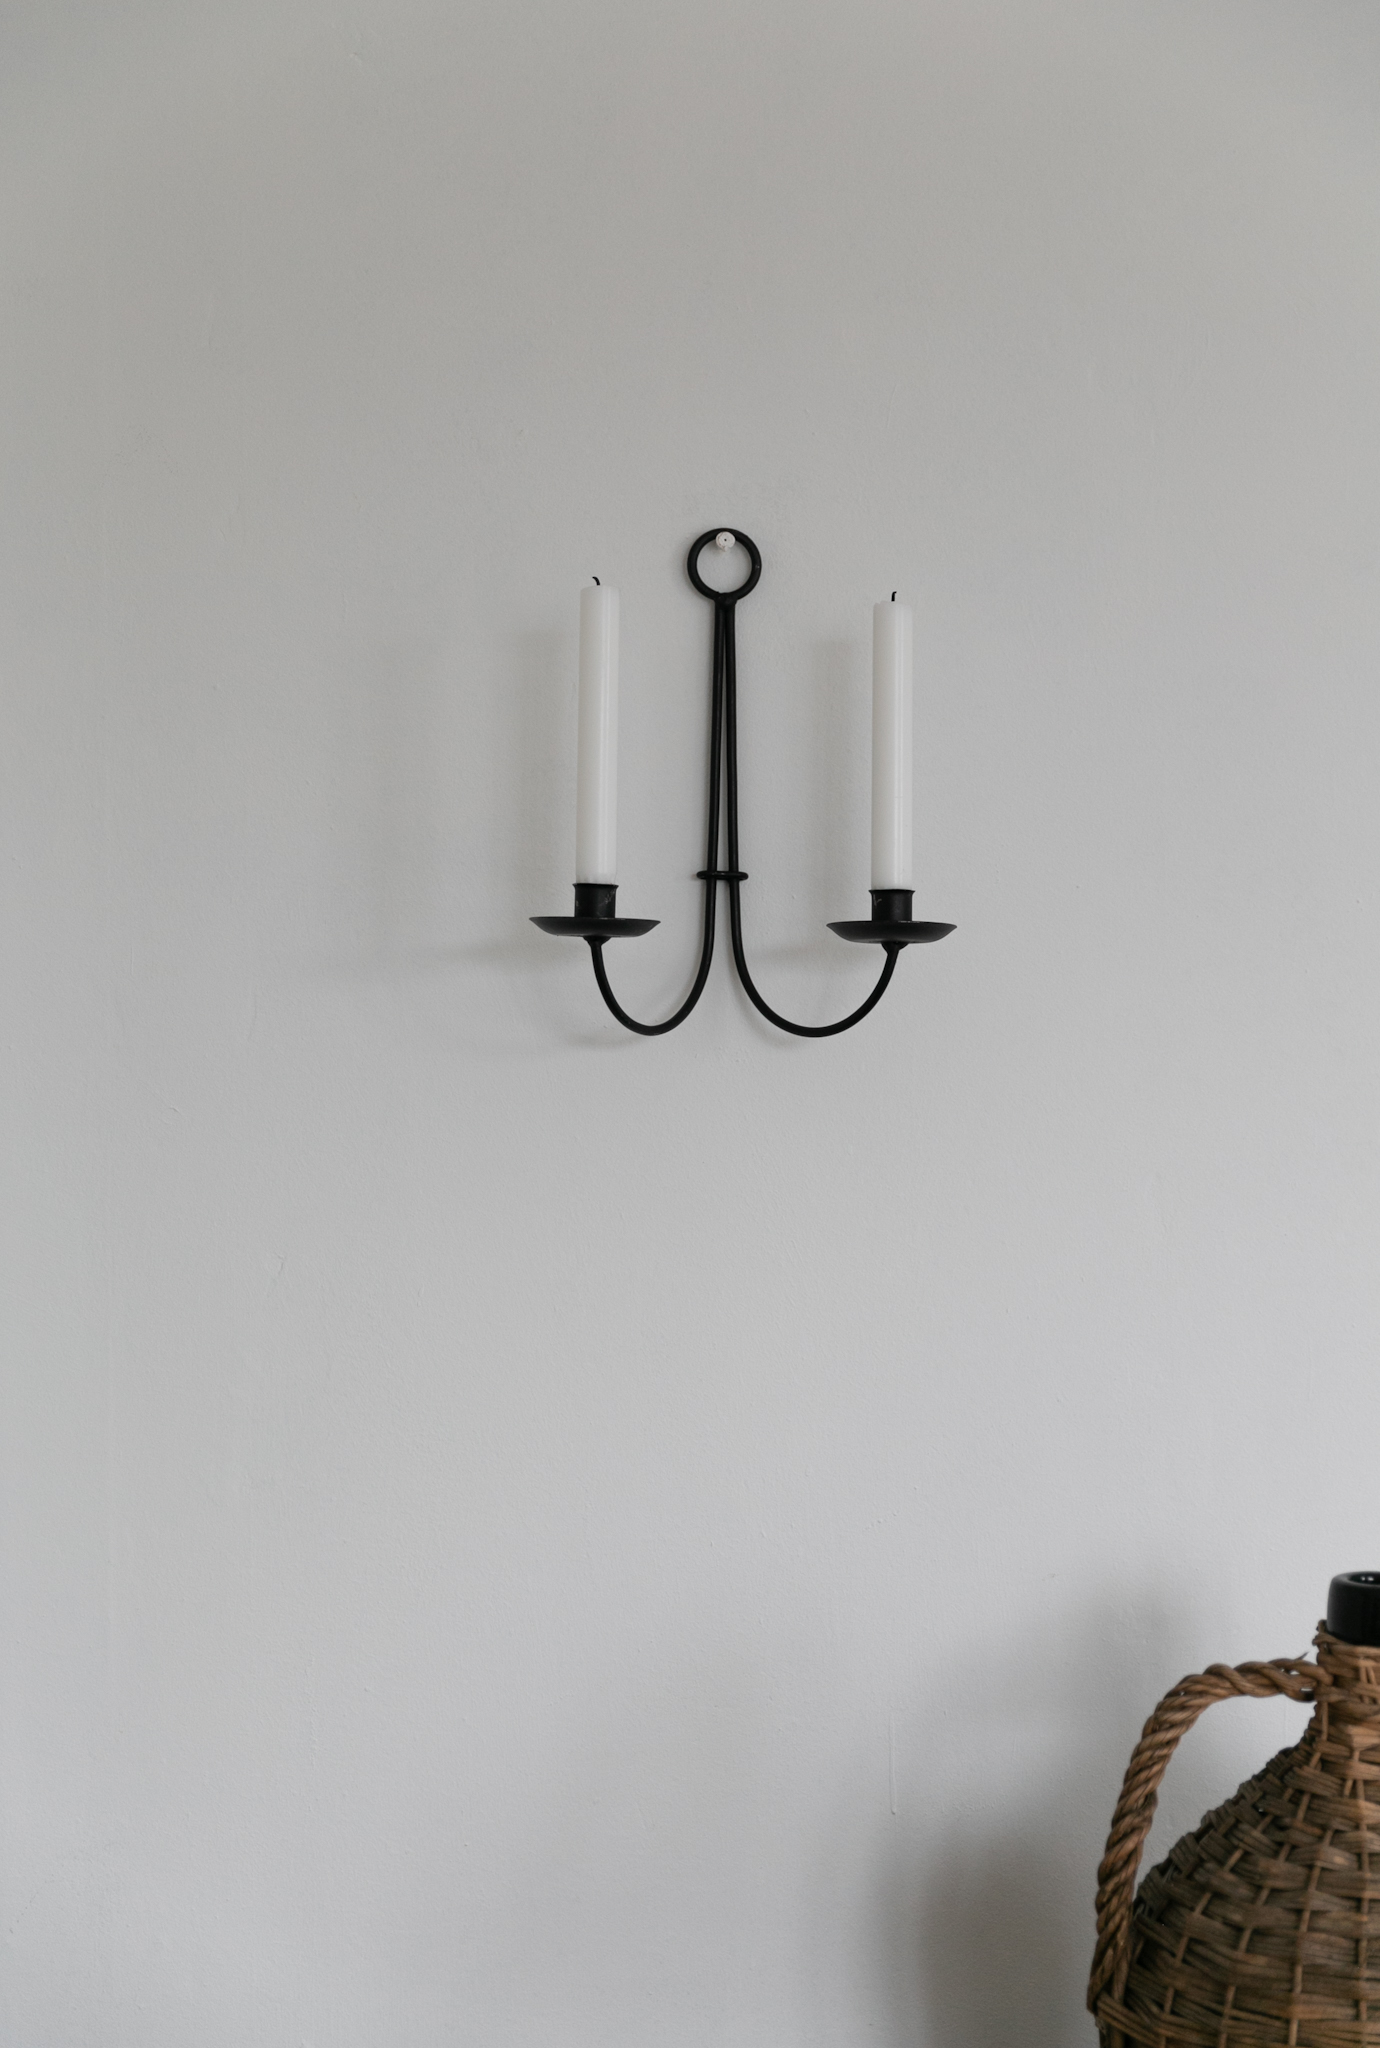 Artisanal wall-mount candle holder